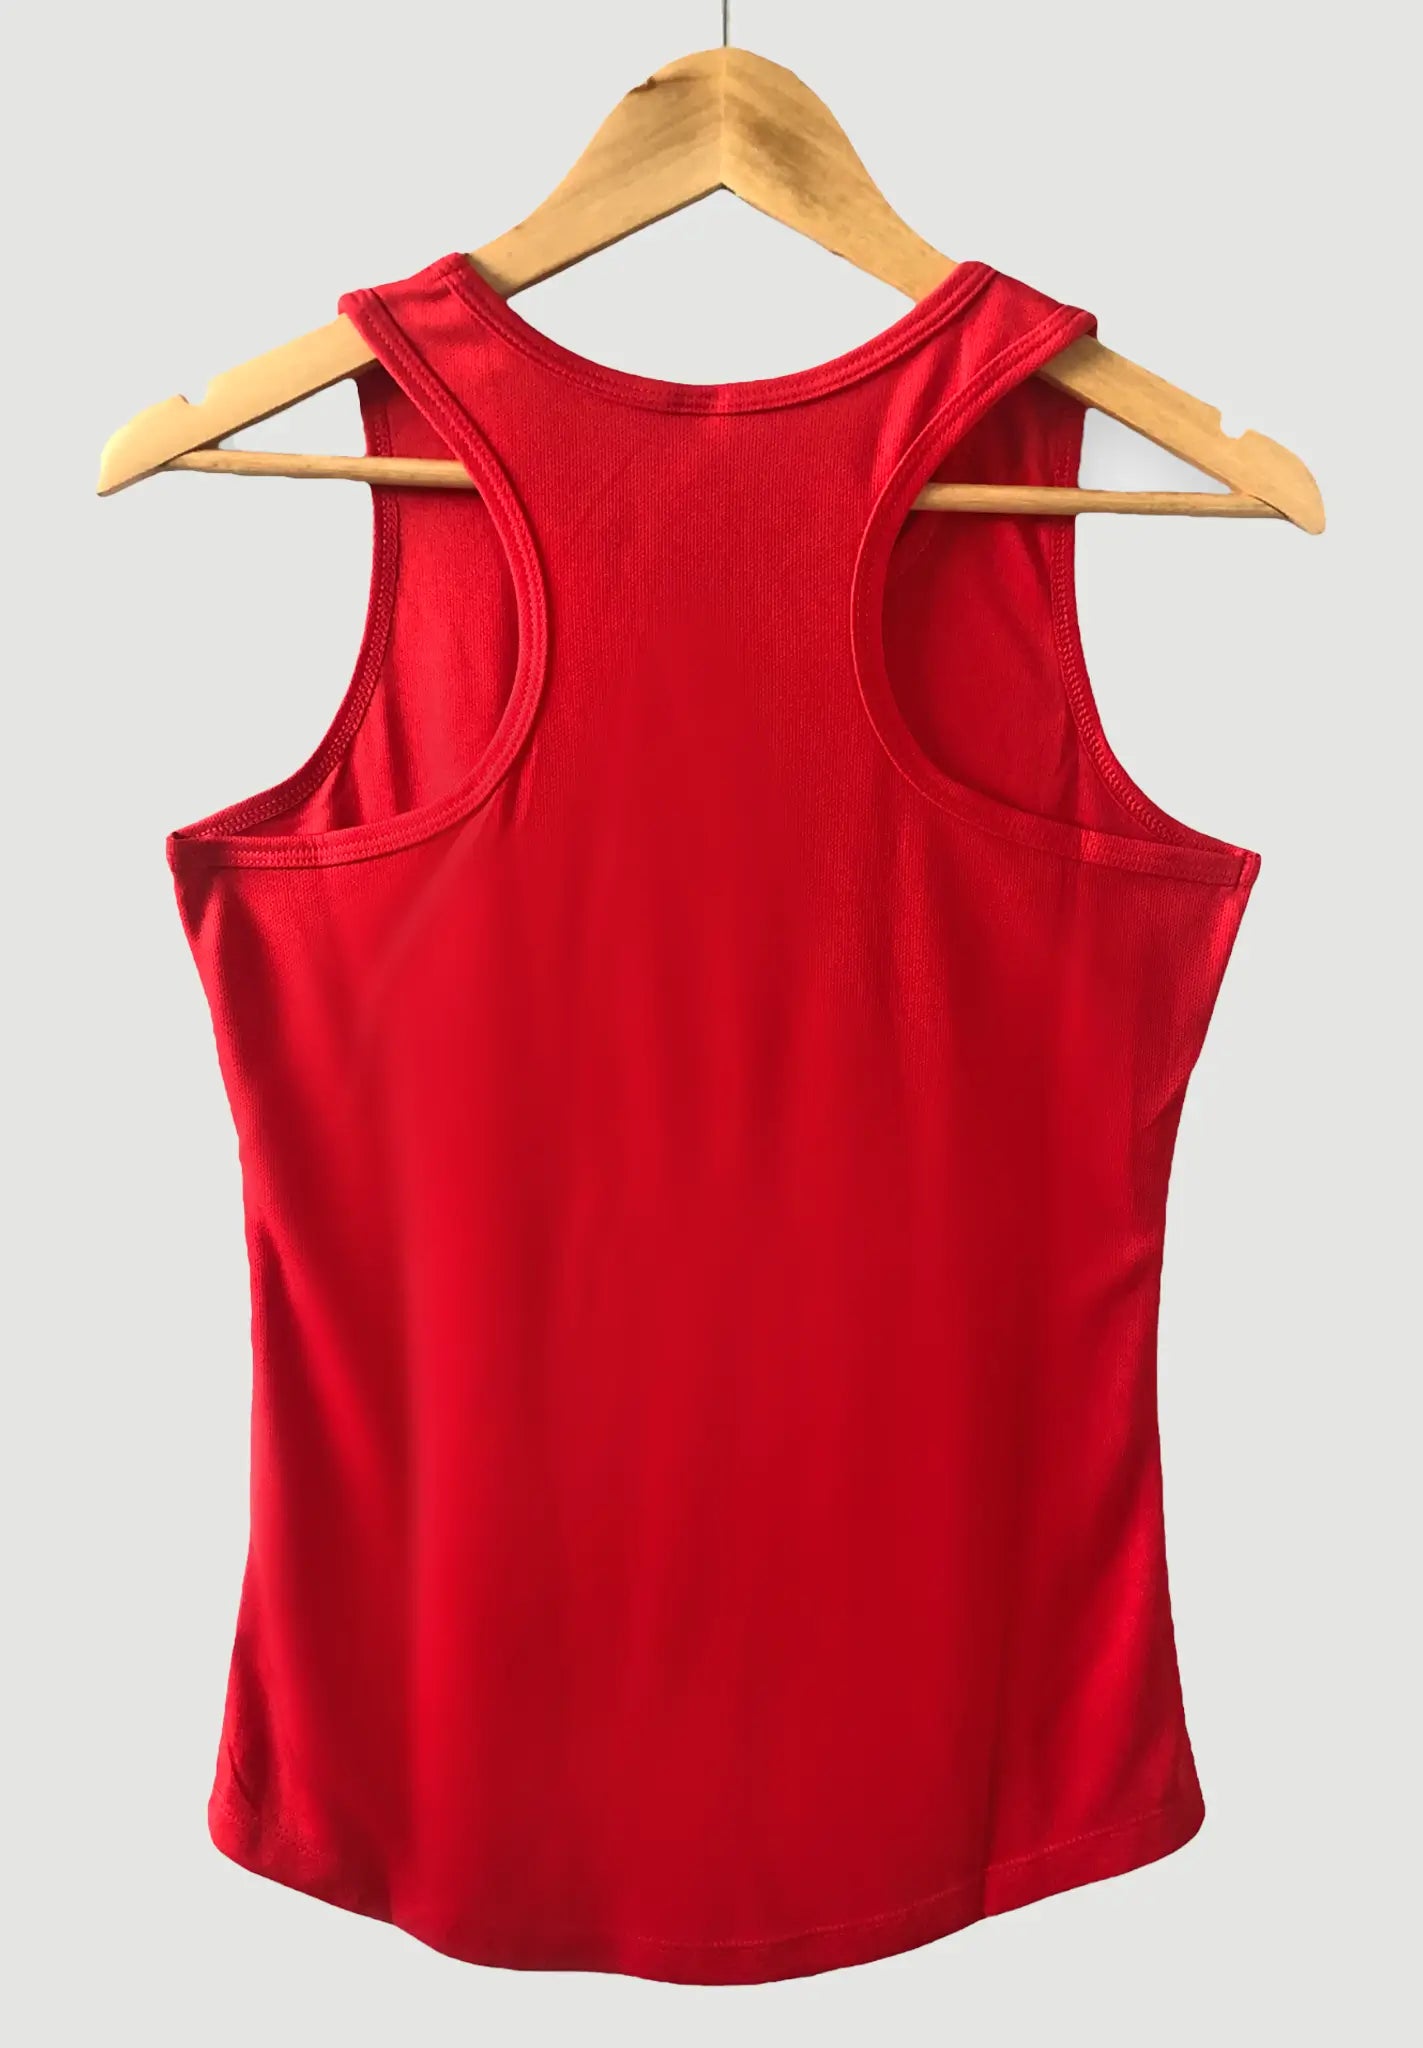 Womens Training Vest Red, Gym Tops For Women